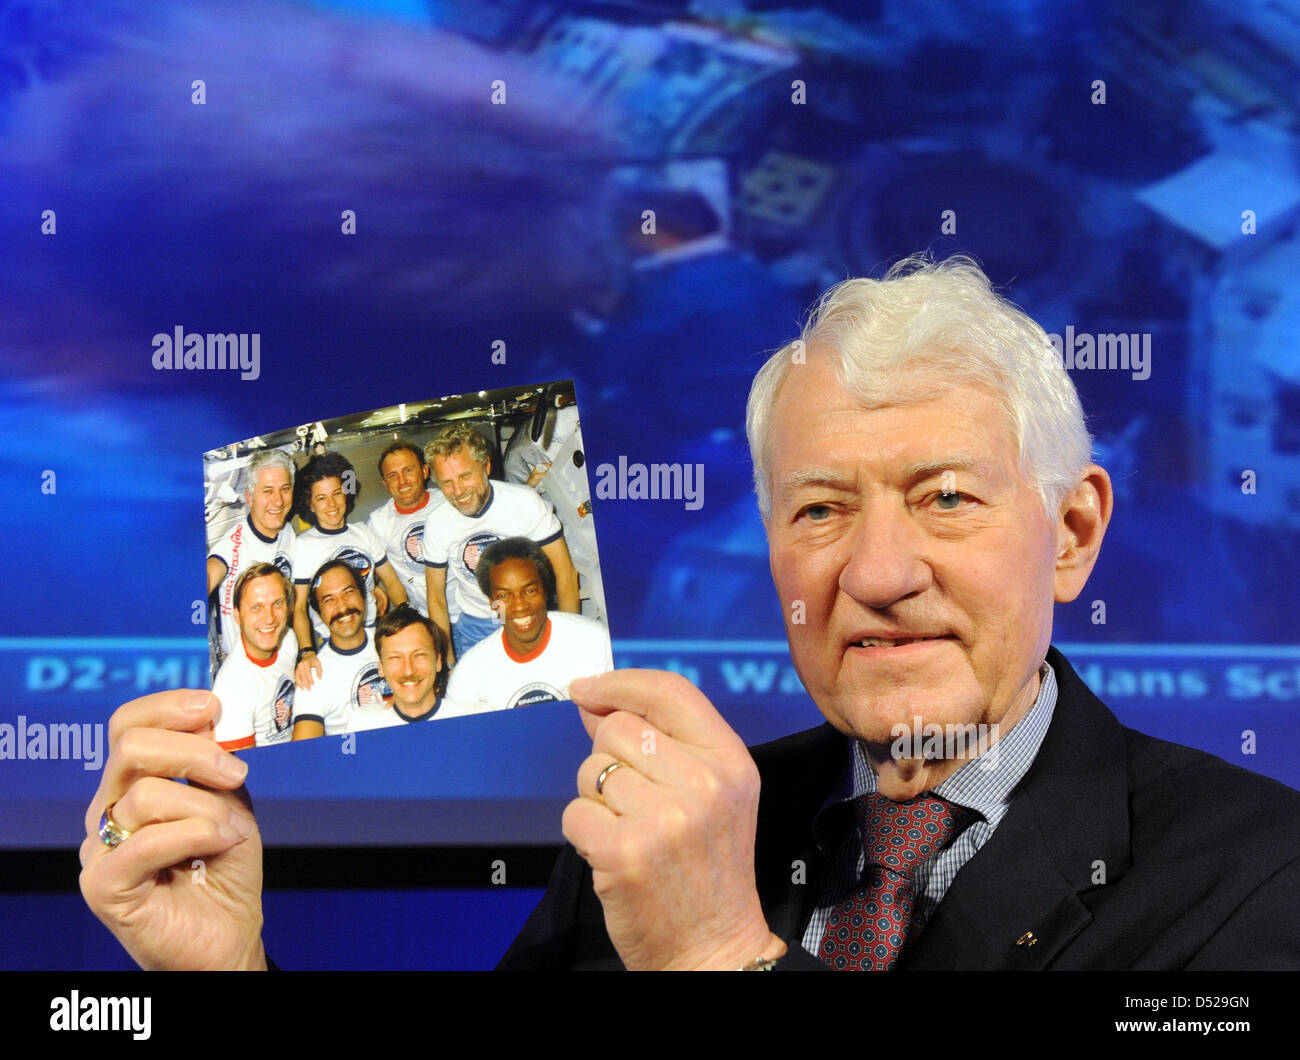 The commander of the Spacelab-D1-Mission, Henry W. Hartsfield Jr., hält am Mittwoch holds up a picture of the former D1 crew from 1975 at the EADS Astrium centre in Bremen, Germany, 27 October 2010. The D1-Mission, the first manned German space mission, celebrates its 25th anniversary. Photo: INGO WAGNER Stock Photo